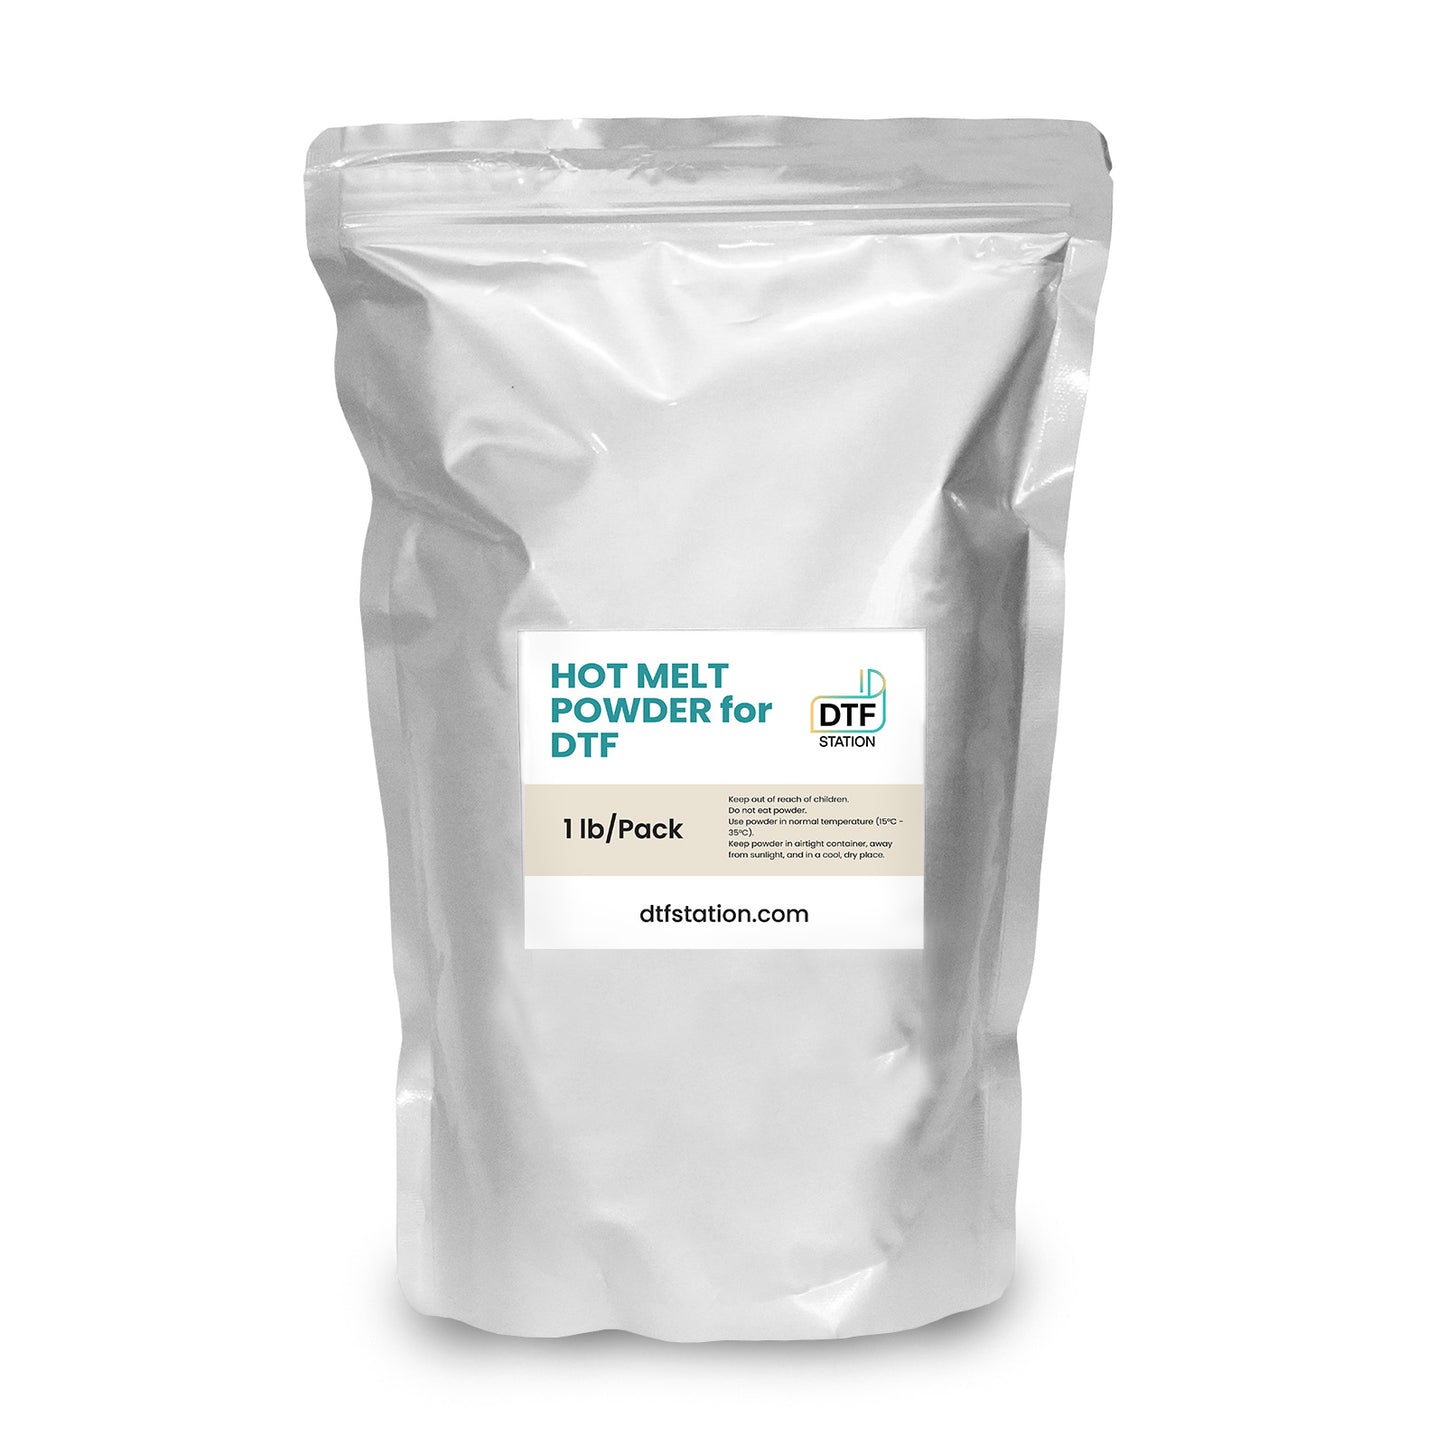 Discontinued - DTF Station Hot Melt Powder for Direct to Film